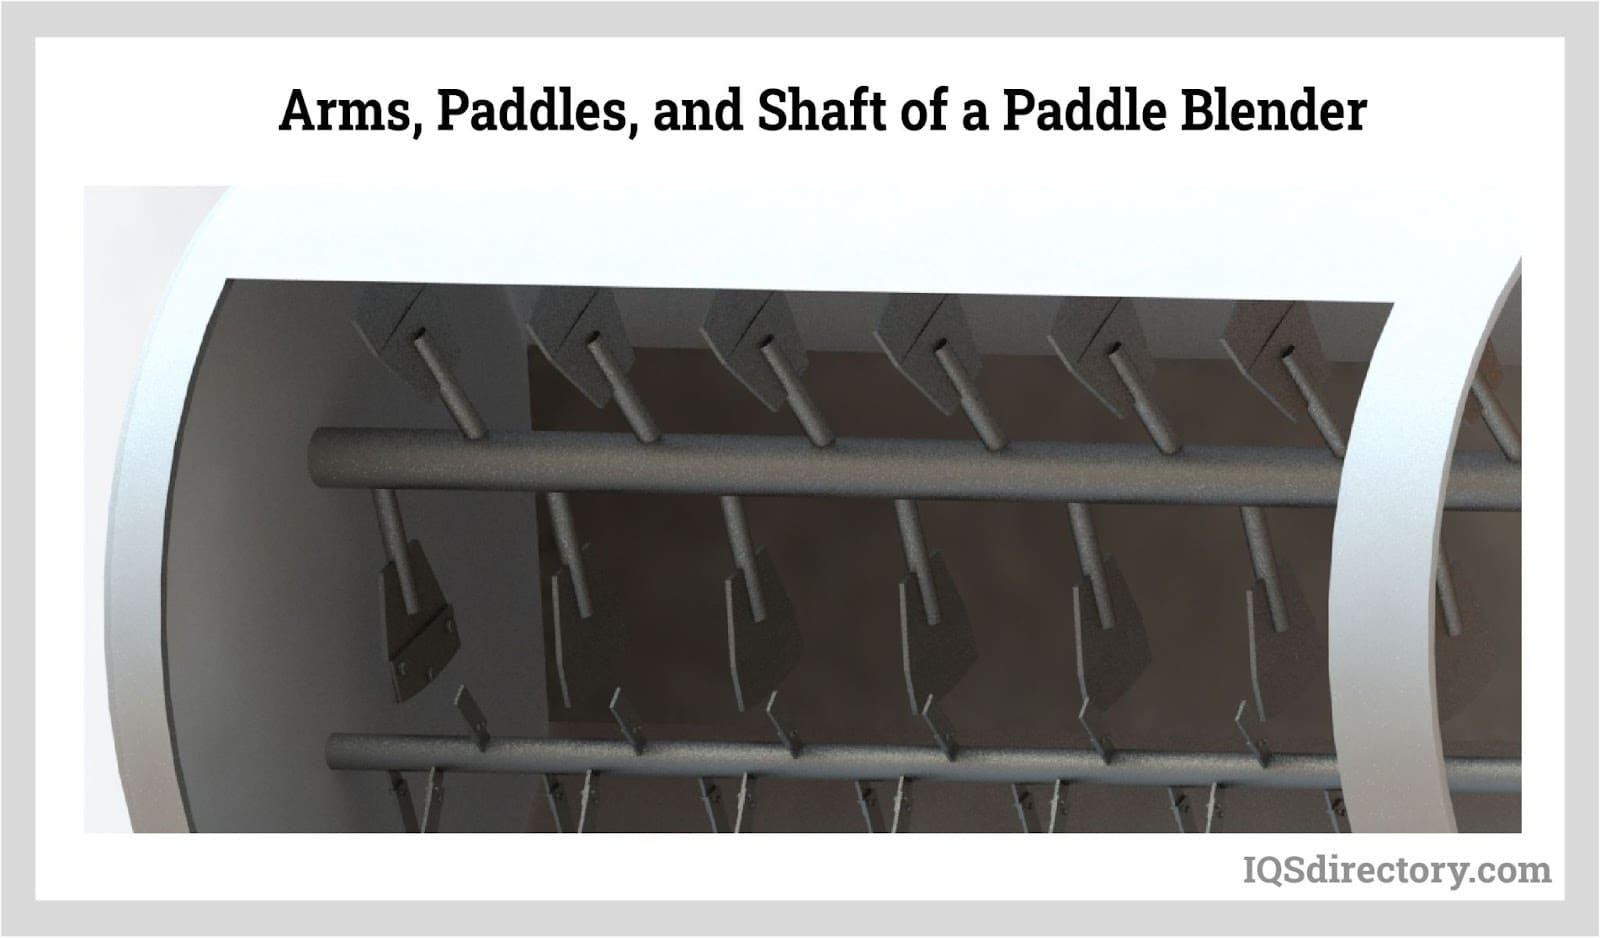 Arms, Paddles, and Shaft of a Paddle Blender